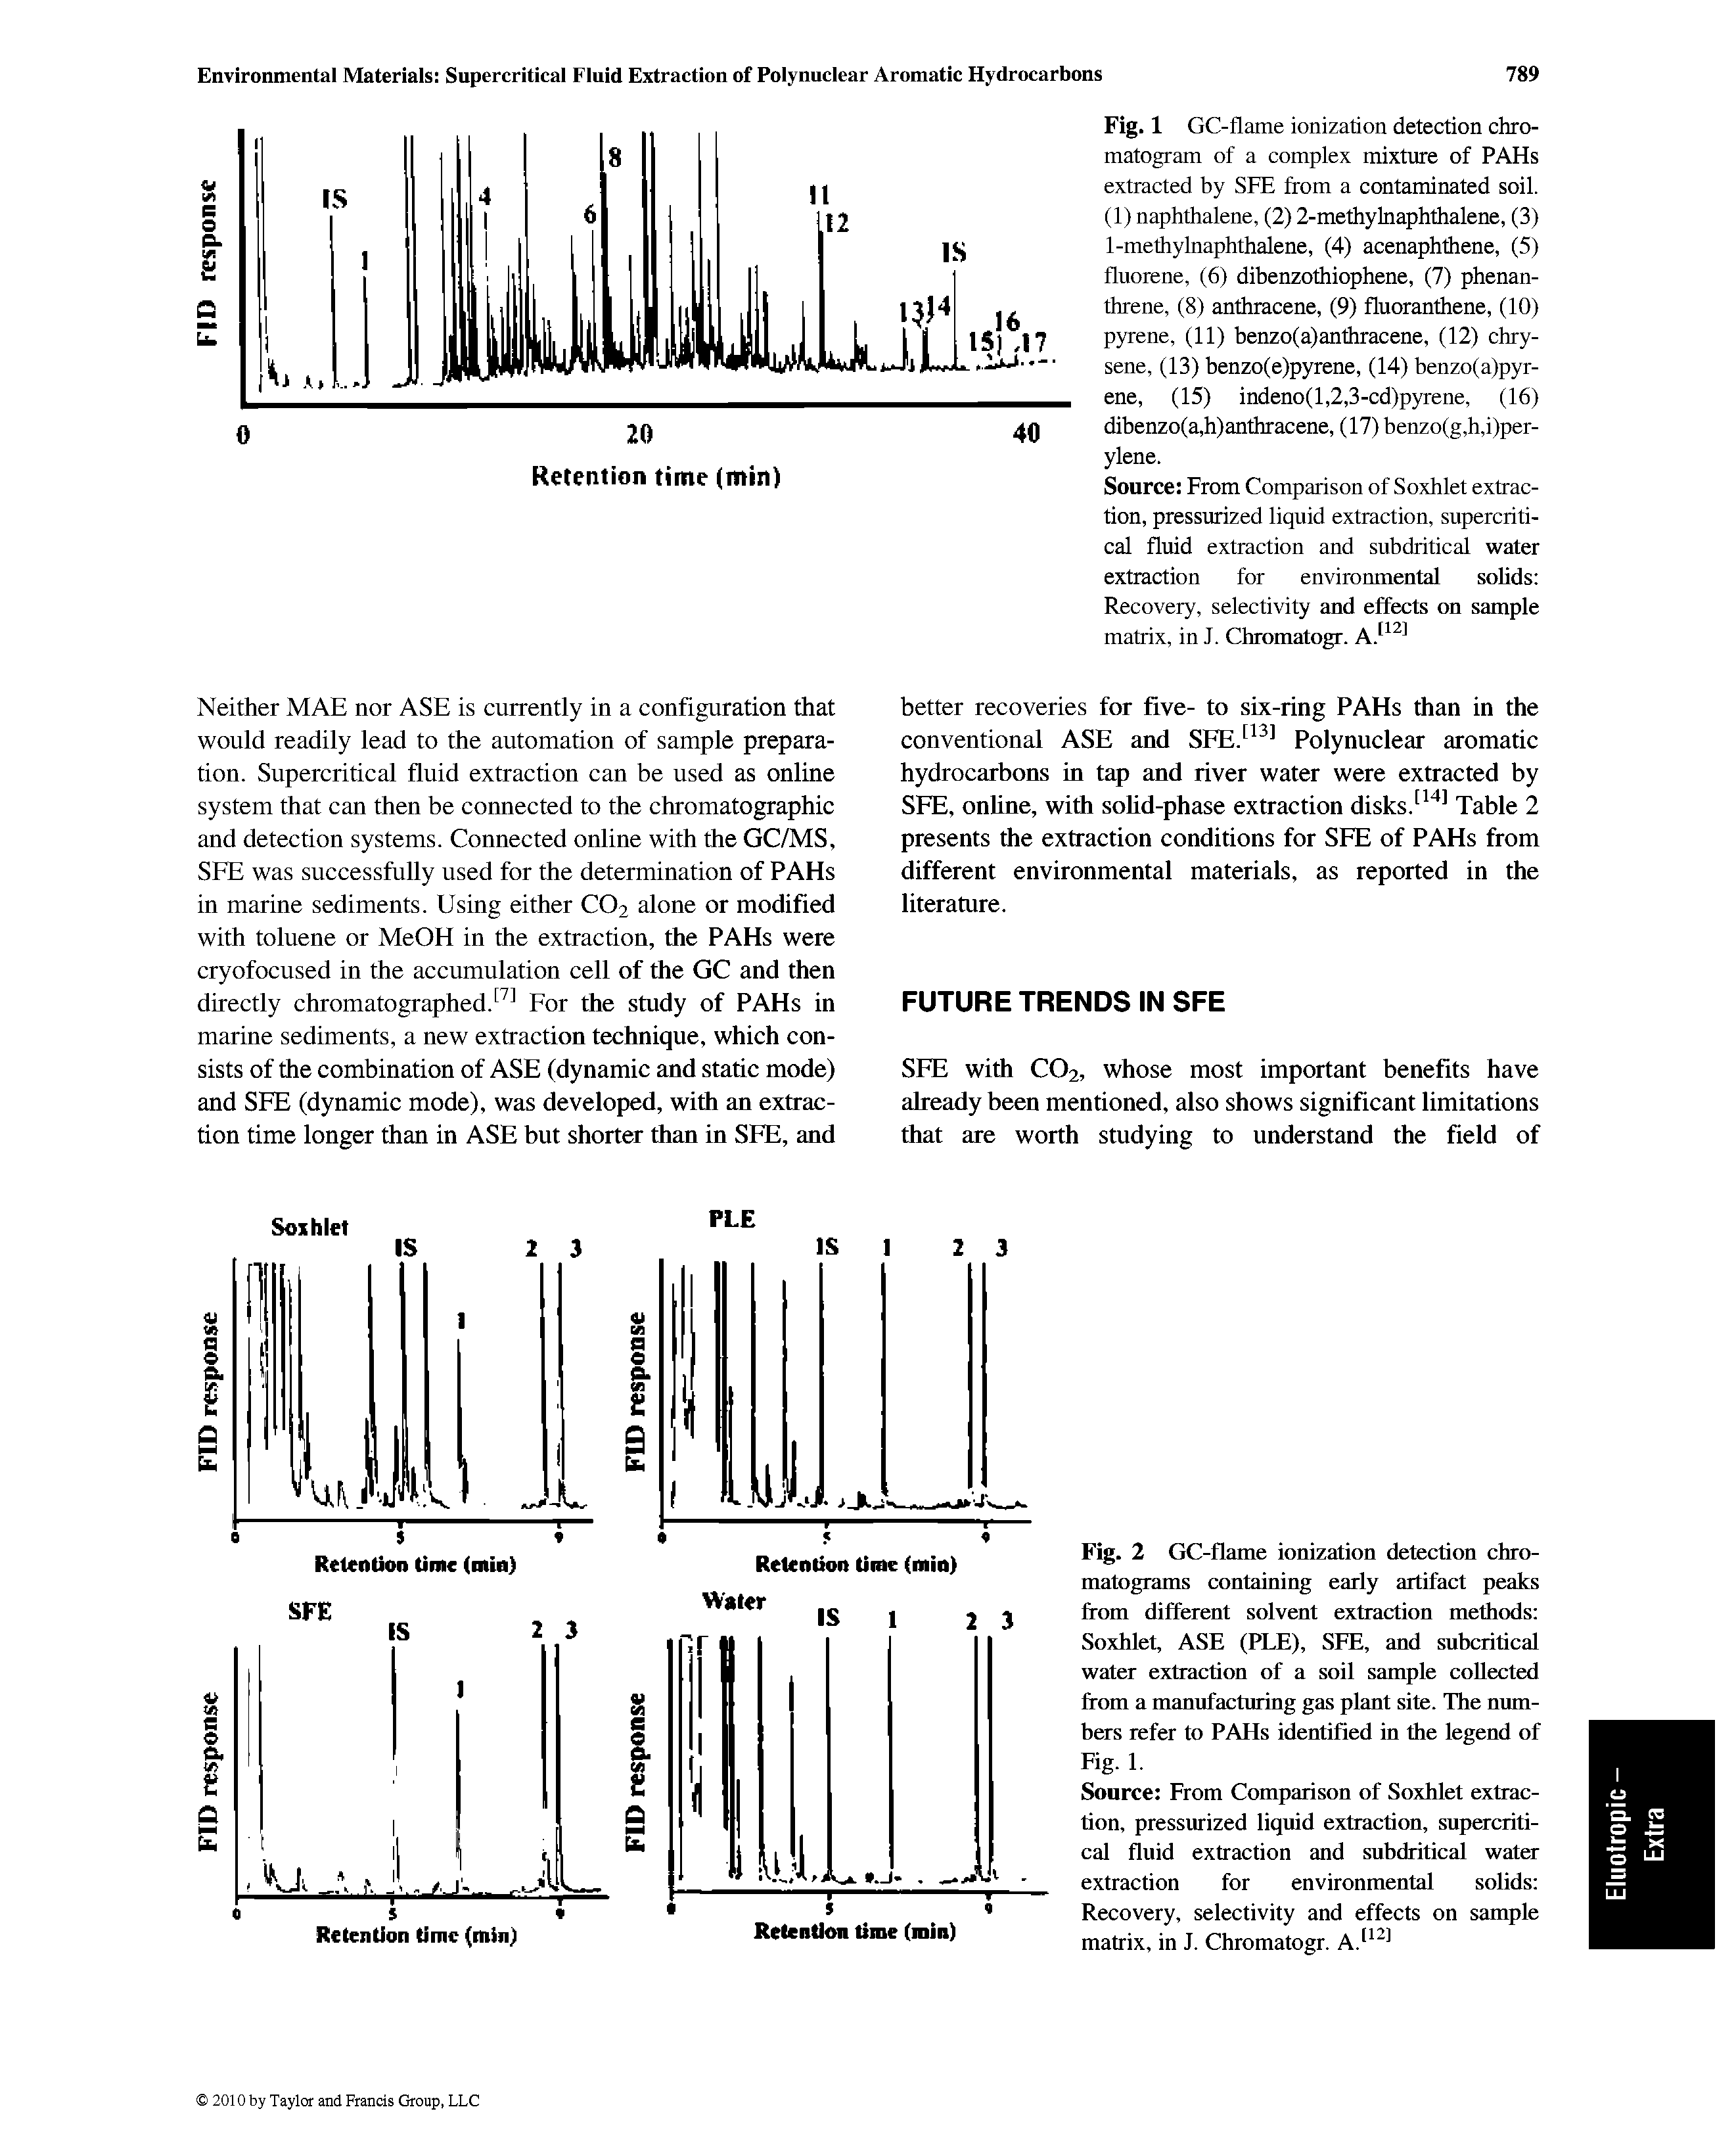 Fig. 1 GC-flame ionization detection chromatogram of a complex mixture of PAHs extracted by SFE from a contaminated soil. (1) naphthalene, (2) 2-methylnaphthalene, (3) 1-methylnaphthalene, (4) acenaphthene, (5) fluorene, (6) dibenzothiophene, (7) phenan-threne, (8) anthracene, (9) fluoranthene, (10) pyrene, (11) benzo(a)anthracene, (12) chrysene, (13) henzo(e)pyrene, (14) benzo(a)pyr-ene, (15) indeno(l,2,3-cd)pyrene, (16) dibenzo(a,h)anthracene, (17) benzo(g,h,i)per-ylene.